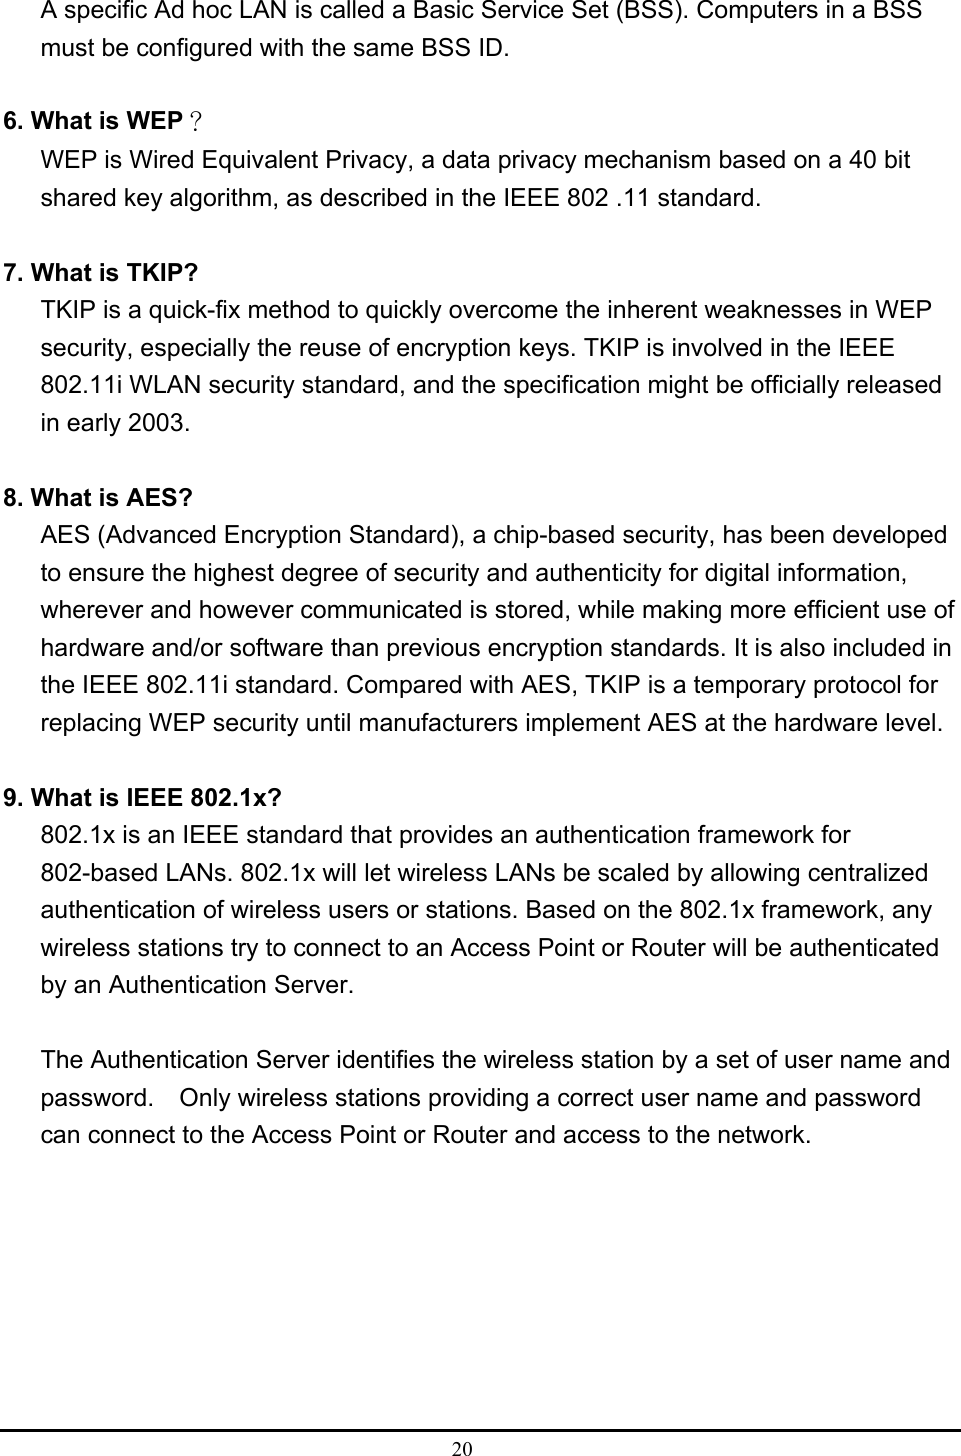  20  A specific Ad hoc LAN is called a Basic Service Set (BSS). Computers in a BSS must be configured with the same BSS ID.  6. What is WEP？ WEP is Wired Equivalent Privacy, a data privacy mechanism based on a 40 bit shared key algorithm, as described in the IEEE 802 .11 standard.  7. What is TKIP? TKIP is a quick-fix method to quickly overcome the inherent weaknesses in WEP security, especially the reuse of encryption keys. TKIP is involved in the IEEE 802.11i WLAN security standard, and the specification might be officially released in early 2003.  8. What is AES? AES (Advanced Encryption Standard), a chip-based security, has been developed to ensure the highest degree of security and authenticity for digital information, wherever and however communicated is stored, while making more efficient use of hardware and/or software than previous encryption standards. It is also included in the IEEE 802.11i standard. Compared with AES, TKIP is a temporary protocol for replacing WEP security until manufacturers implement AES at the hardware level.  9. What is IEEE 802.1x? 802.1x is an IEEE standard that provides an authentication framework for 802-based LANs. 802.1x will let wireless LANs be scaled by allowing centralized authentication of wireless users or stations. Based on the 802.1x framework, any wireless stations try to connect to an Access Point or Router will be authenticated by an Authentication Server.  The Authentication Server identifies the wireless station by a set of user name and password.    Only wireless stations providing a correct user name and password can connect to the Access Point or Router and access to the network. 